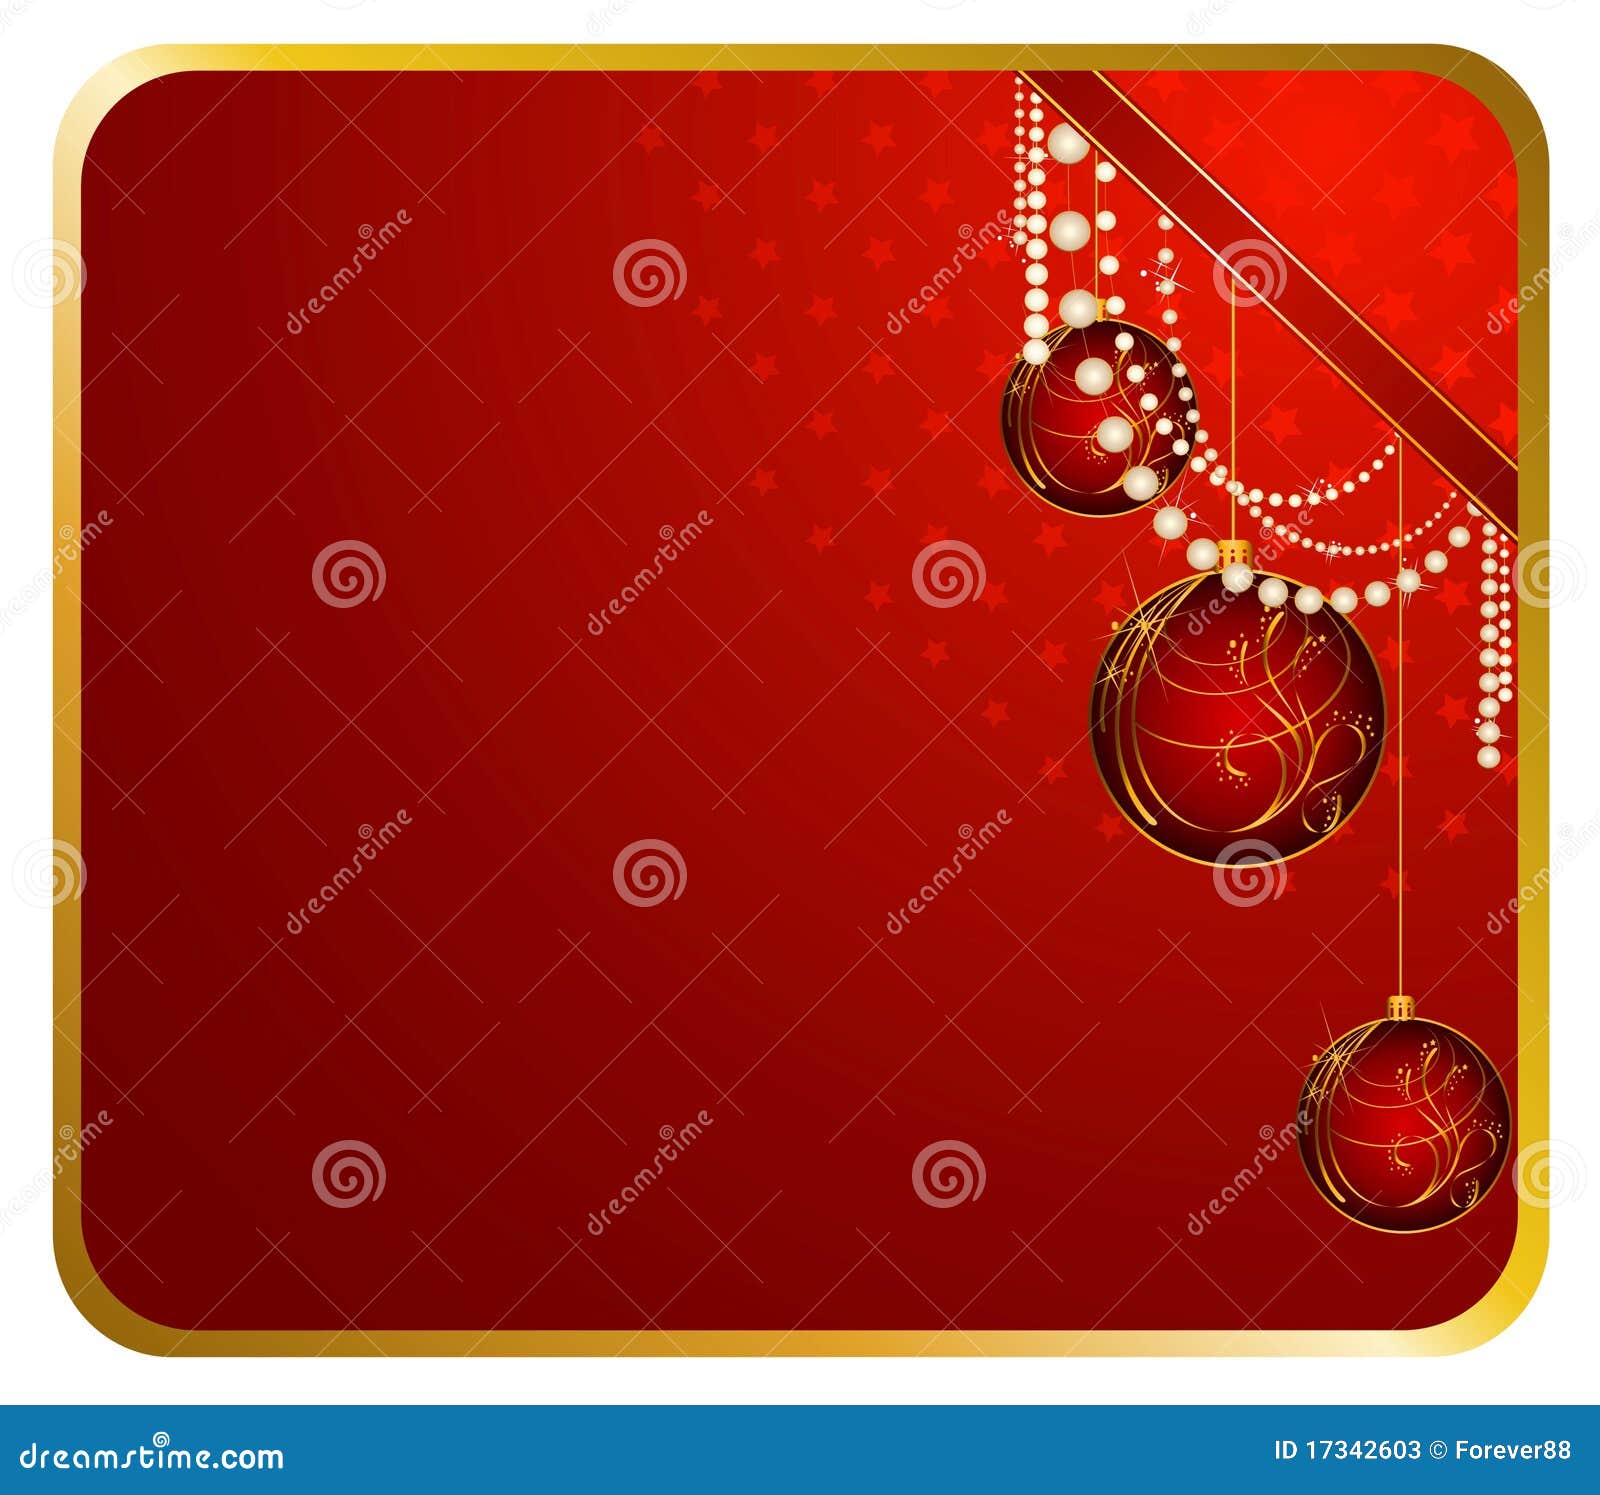 Background with bolls stock vector. Illustration of background - 17342603